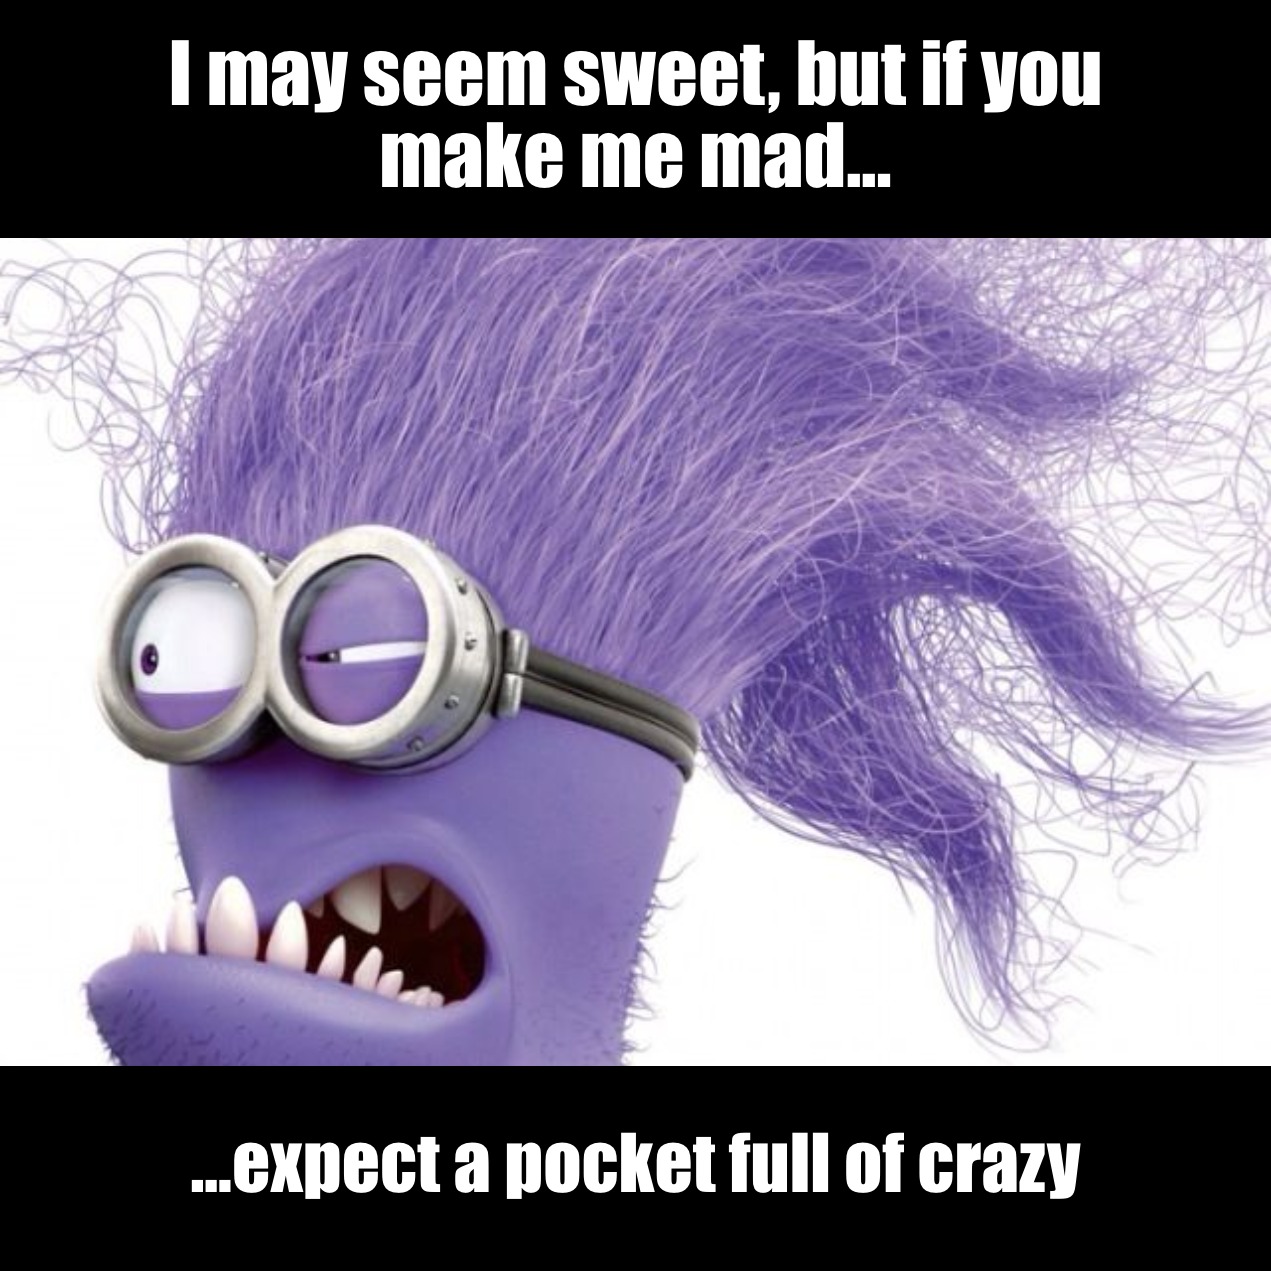 Expect a pocket full of crazy